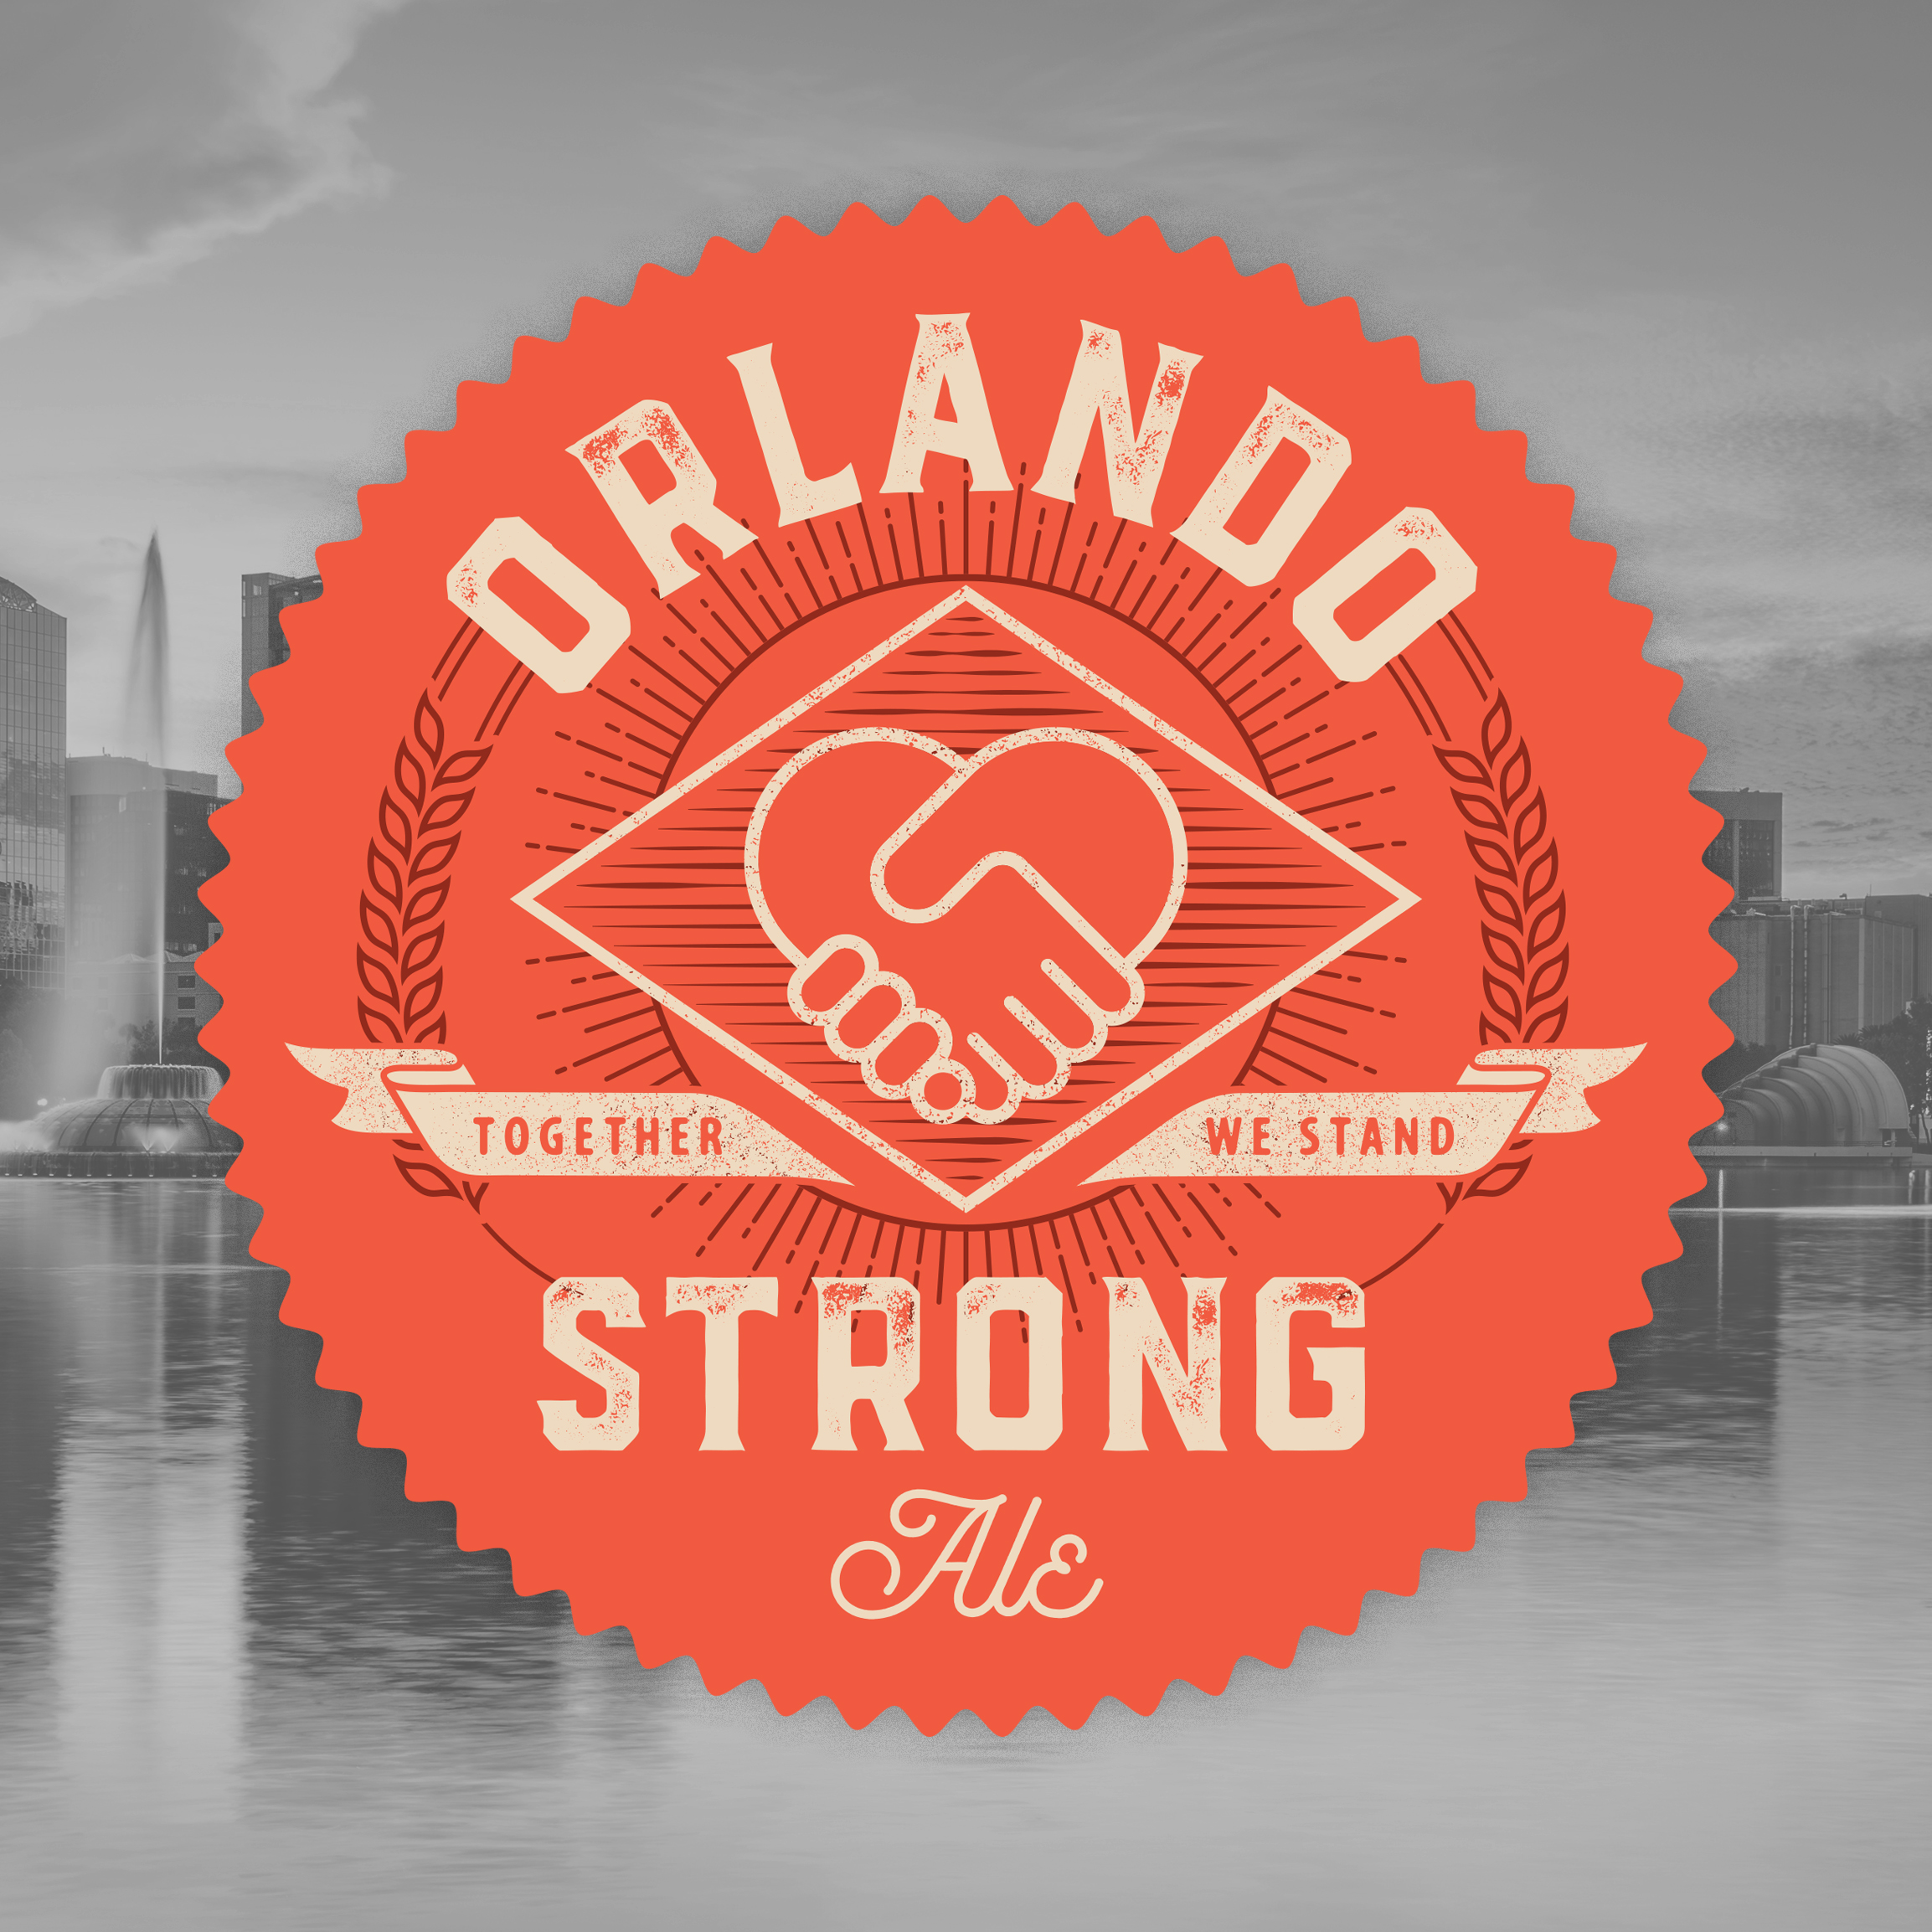 100% of Proceeds from Craft A Brew's sale's of Orlando Strong Ale home brewing kit will go to the victims of the Orlando tragedy